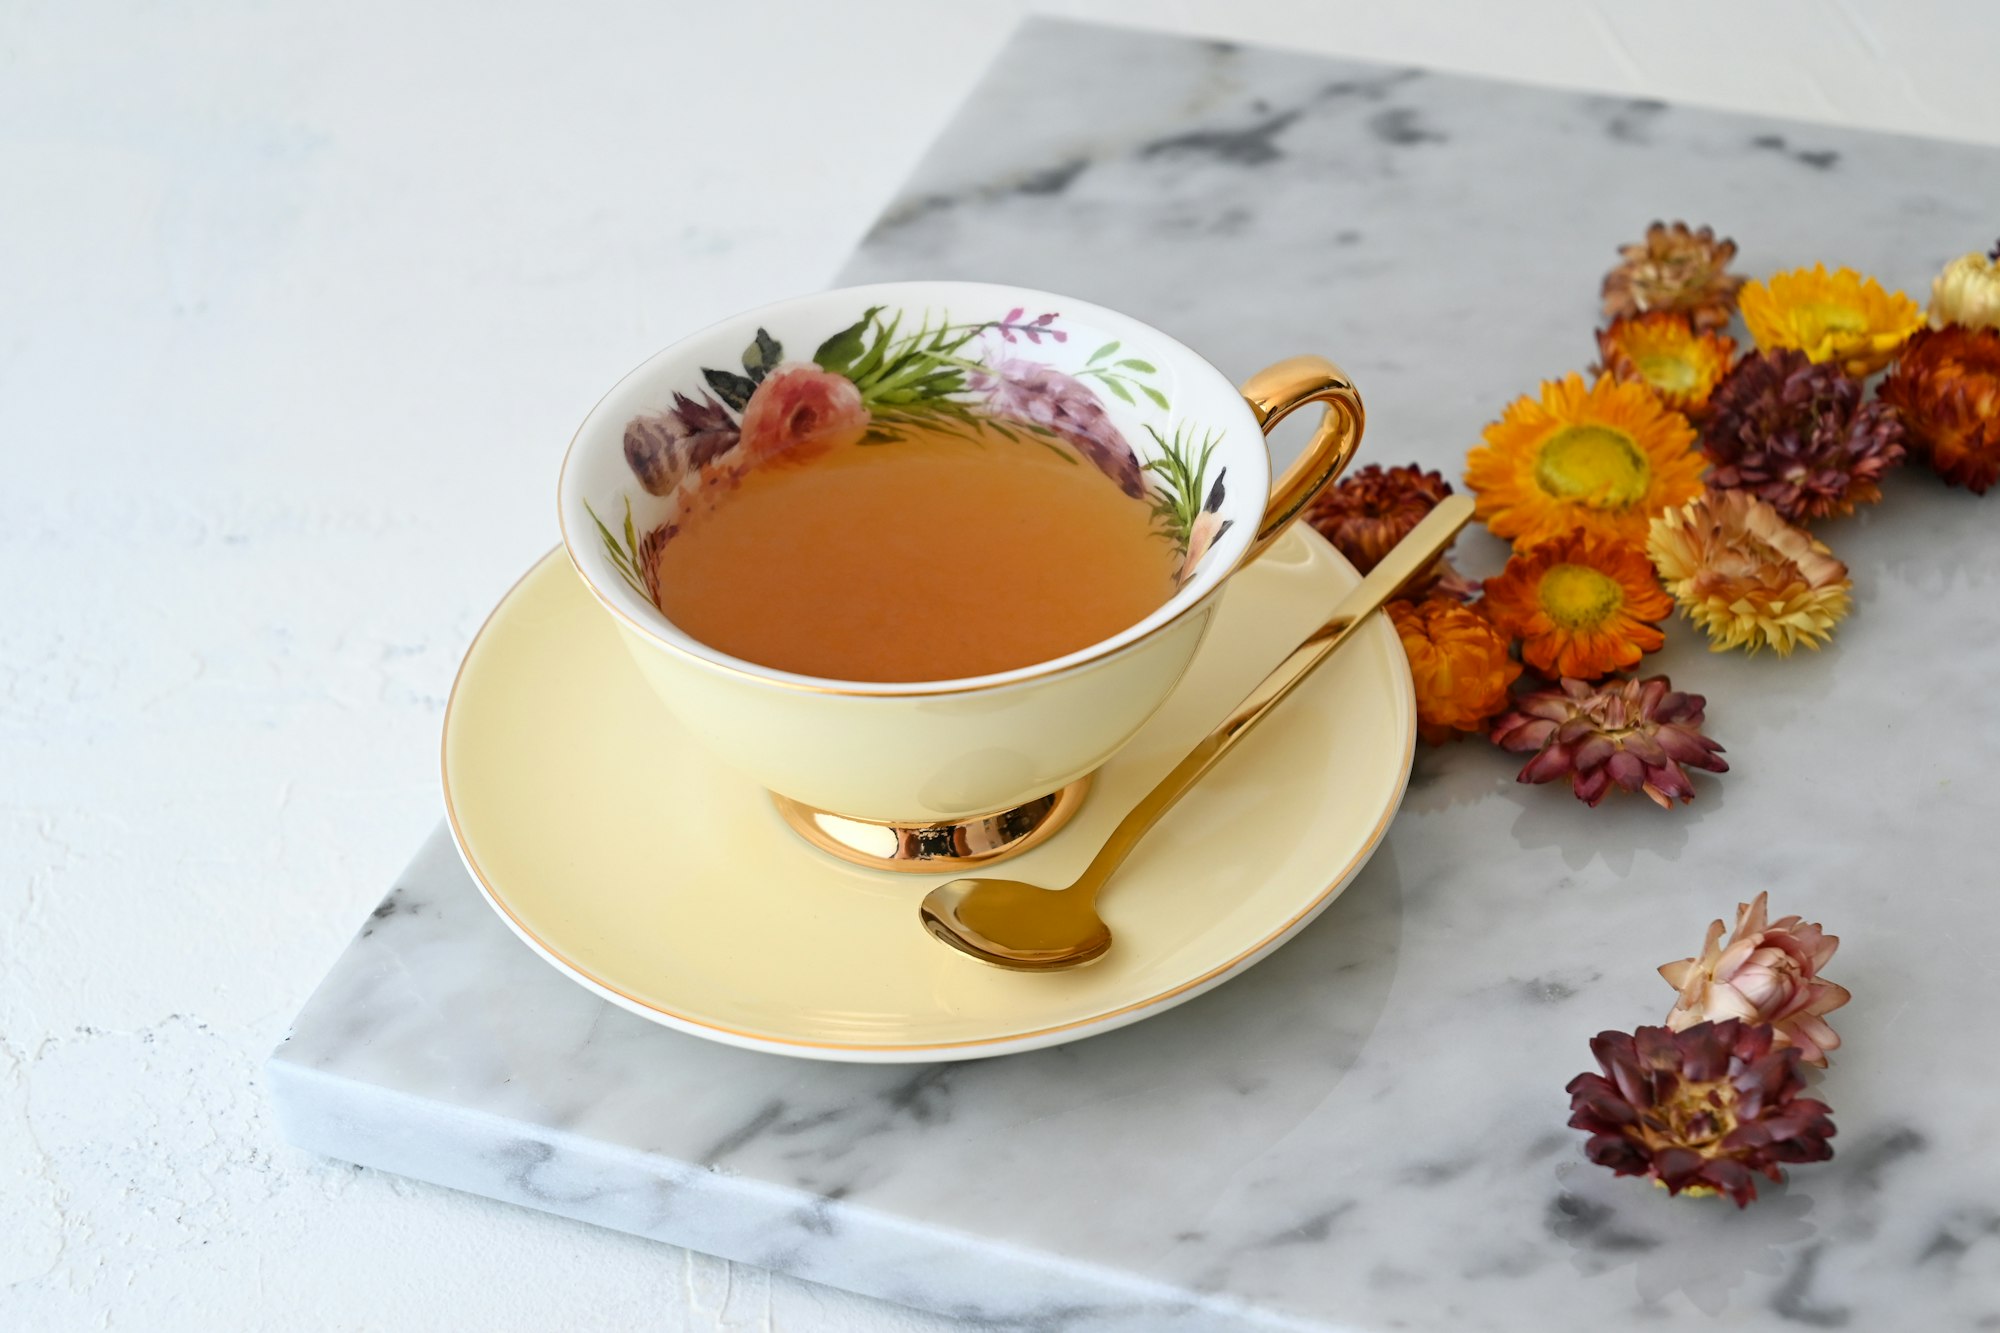 Teas for indigestion and heartburn: Don't let stomach upsets ruin your day